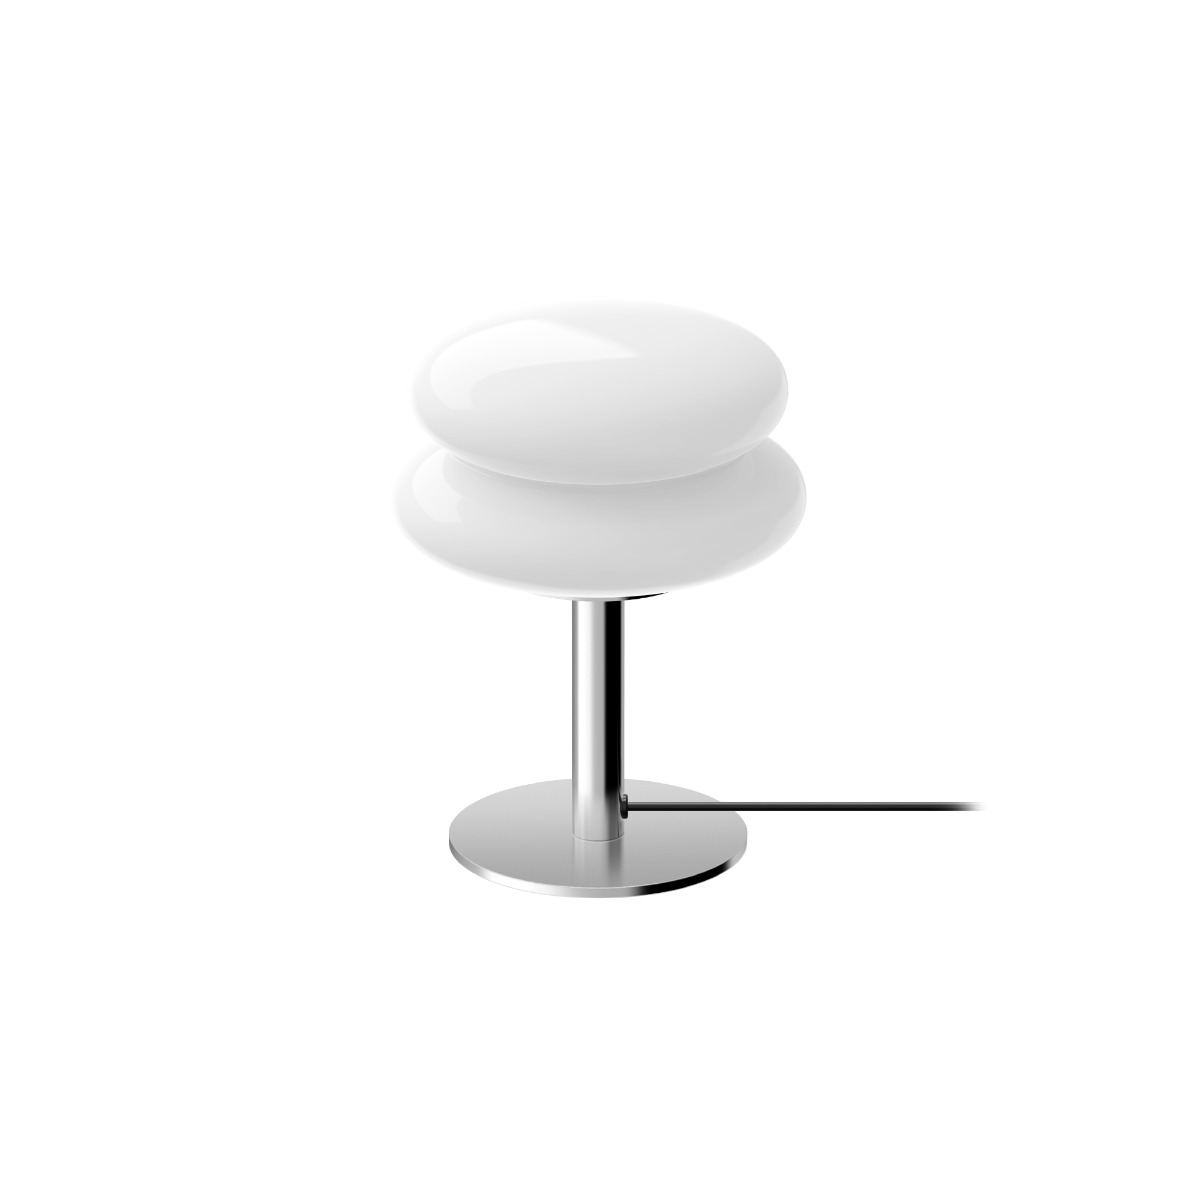 ilkwang Lighting SNOWMAN22 Table Stand - White